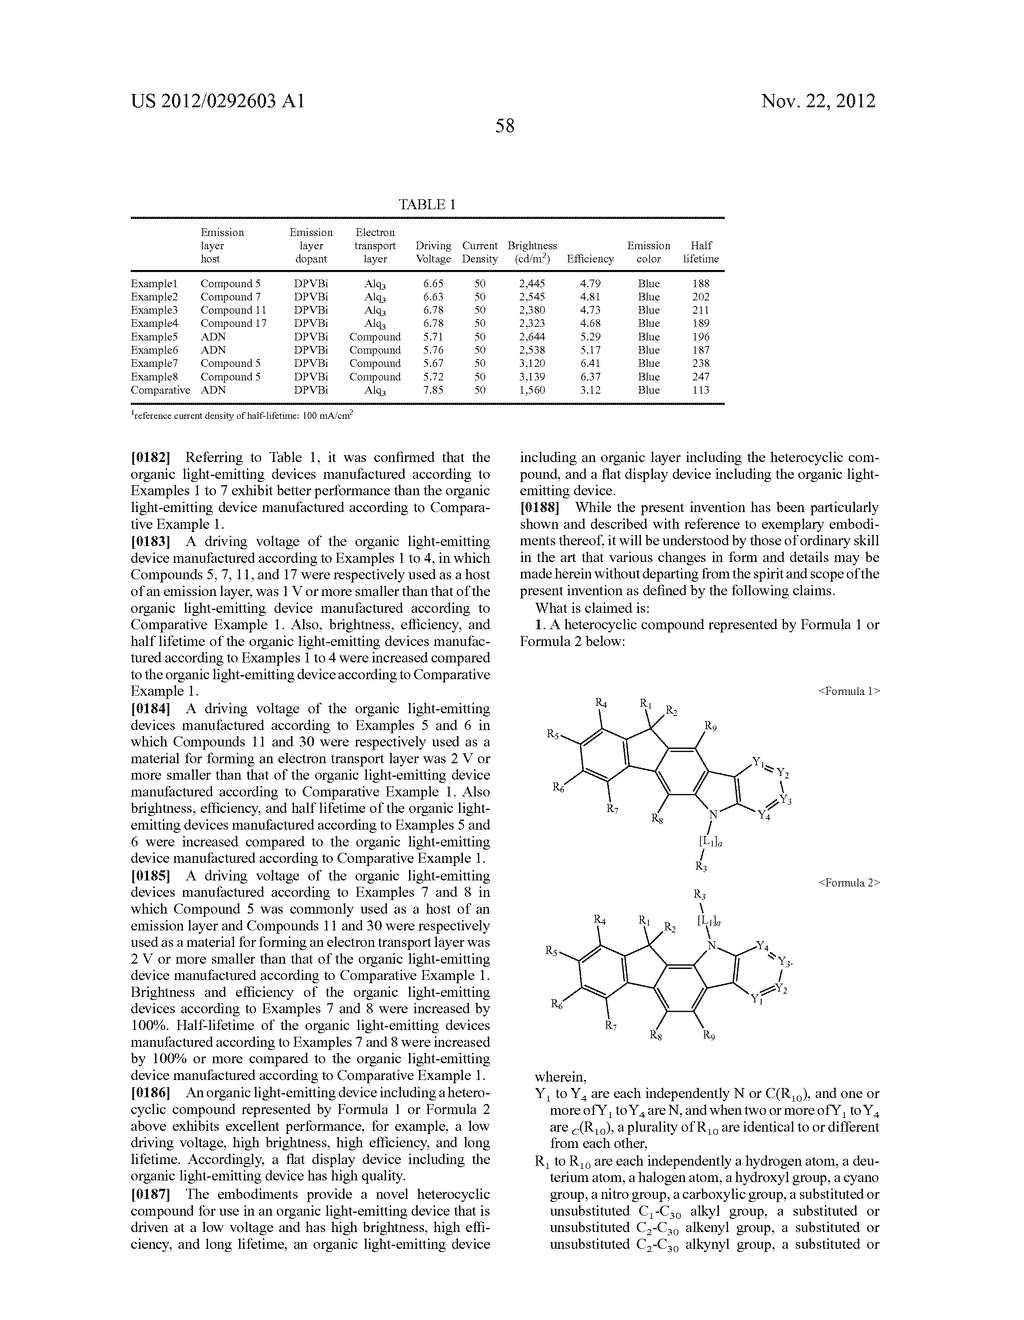 Heterocyclic compound, organic light-emitting device including the     heterocyclic compound, and flat display device including the organic     light-emitting device - diagram, schematic, and image 60